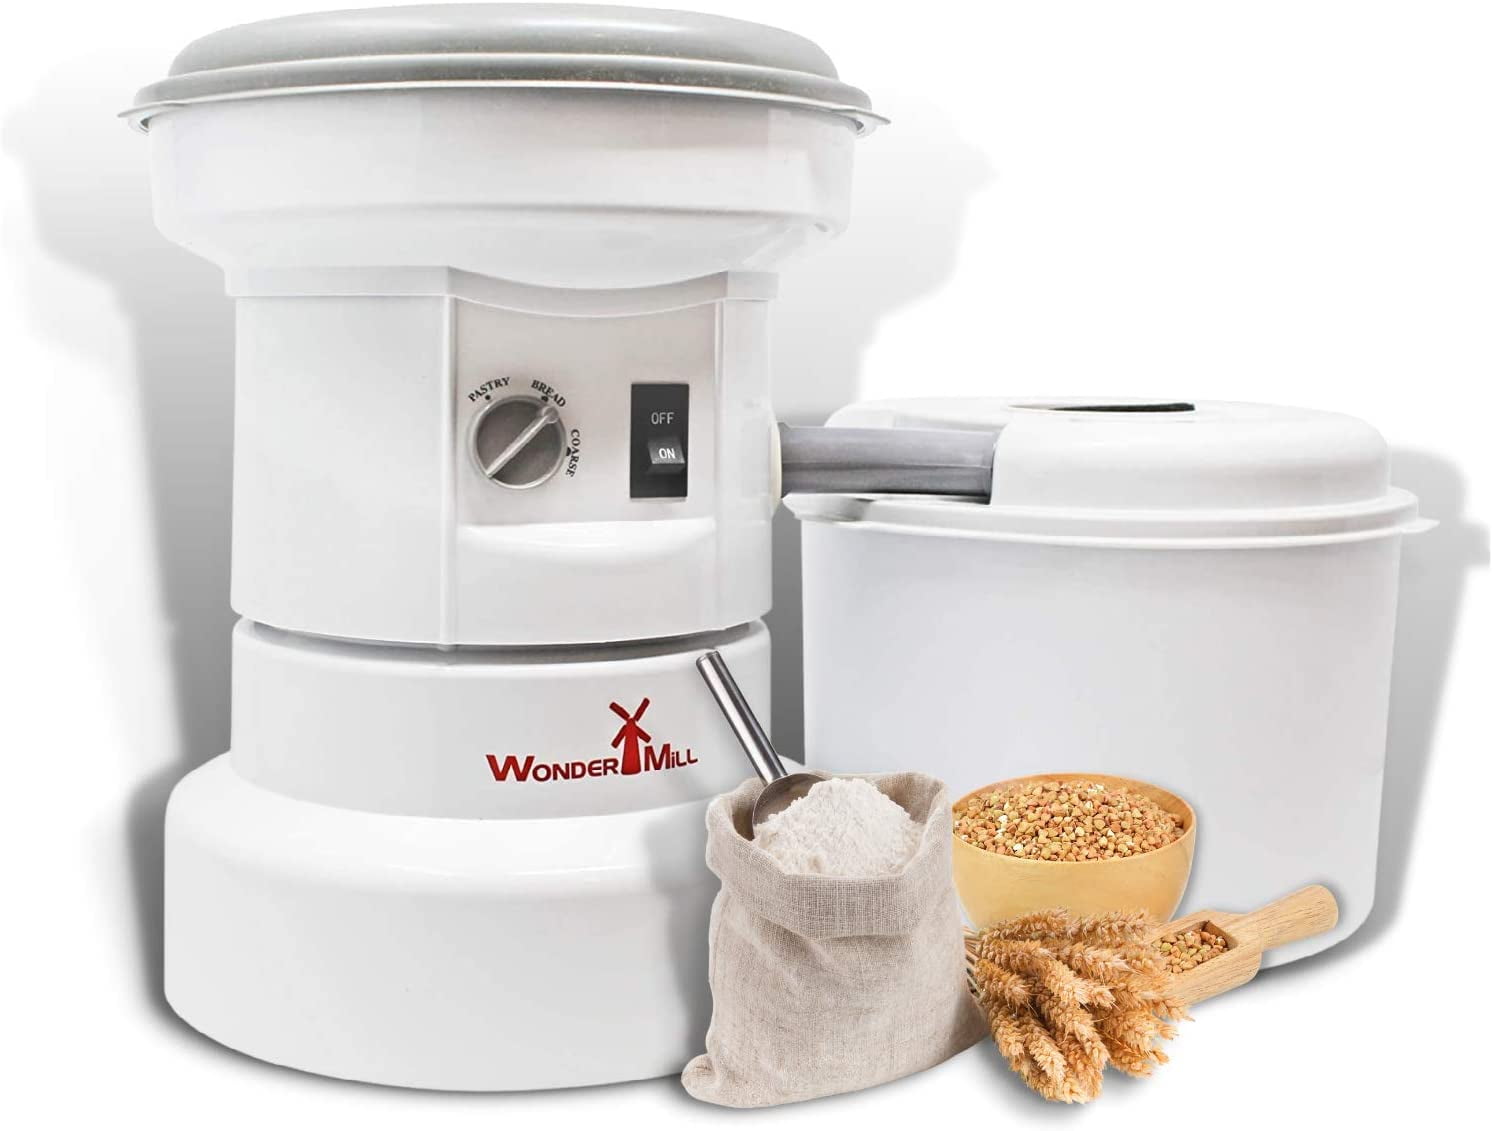 Electric Grain Grinder Mill by Wondermill,Portable Electric Cereal Grain Grinder 